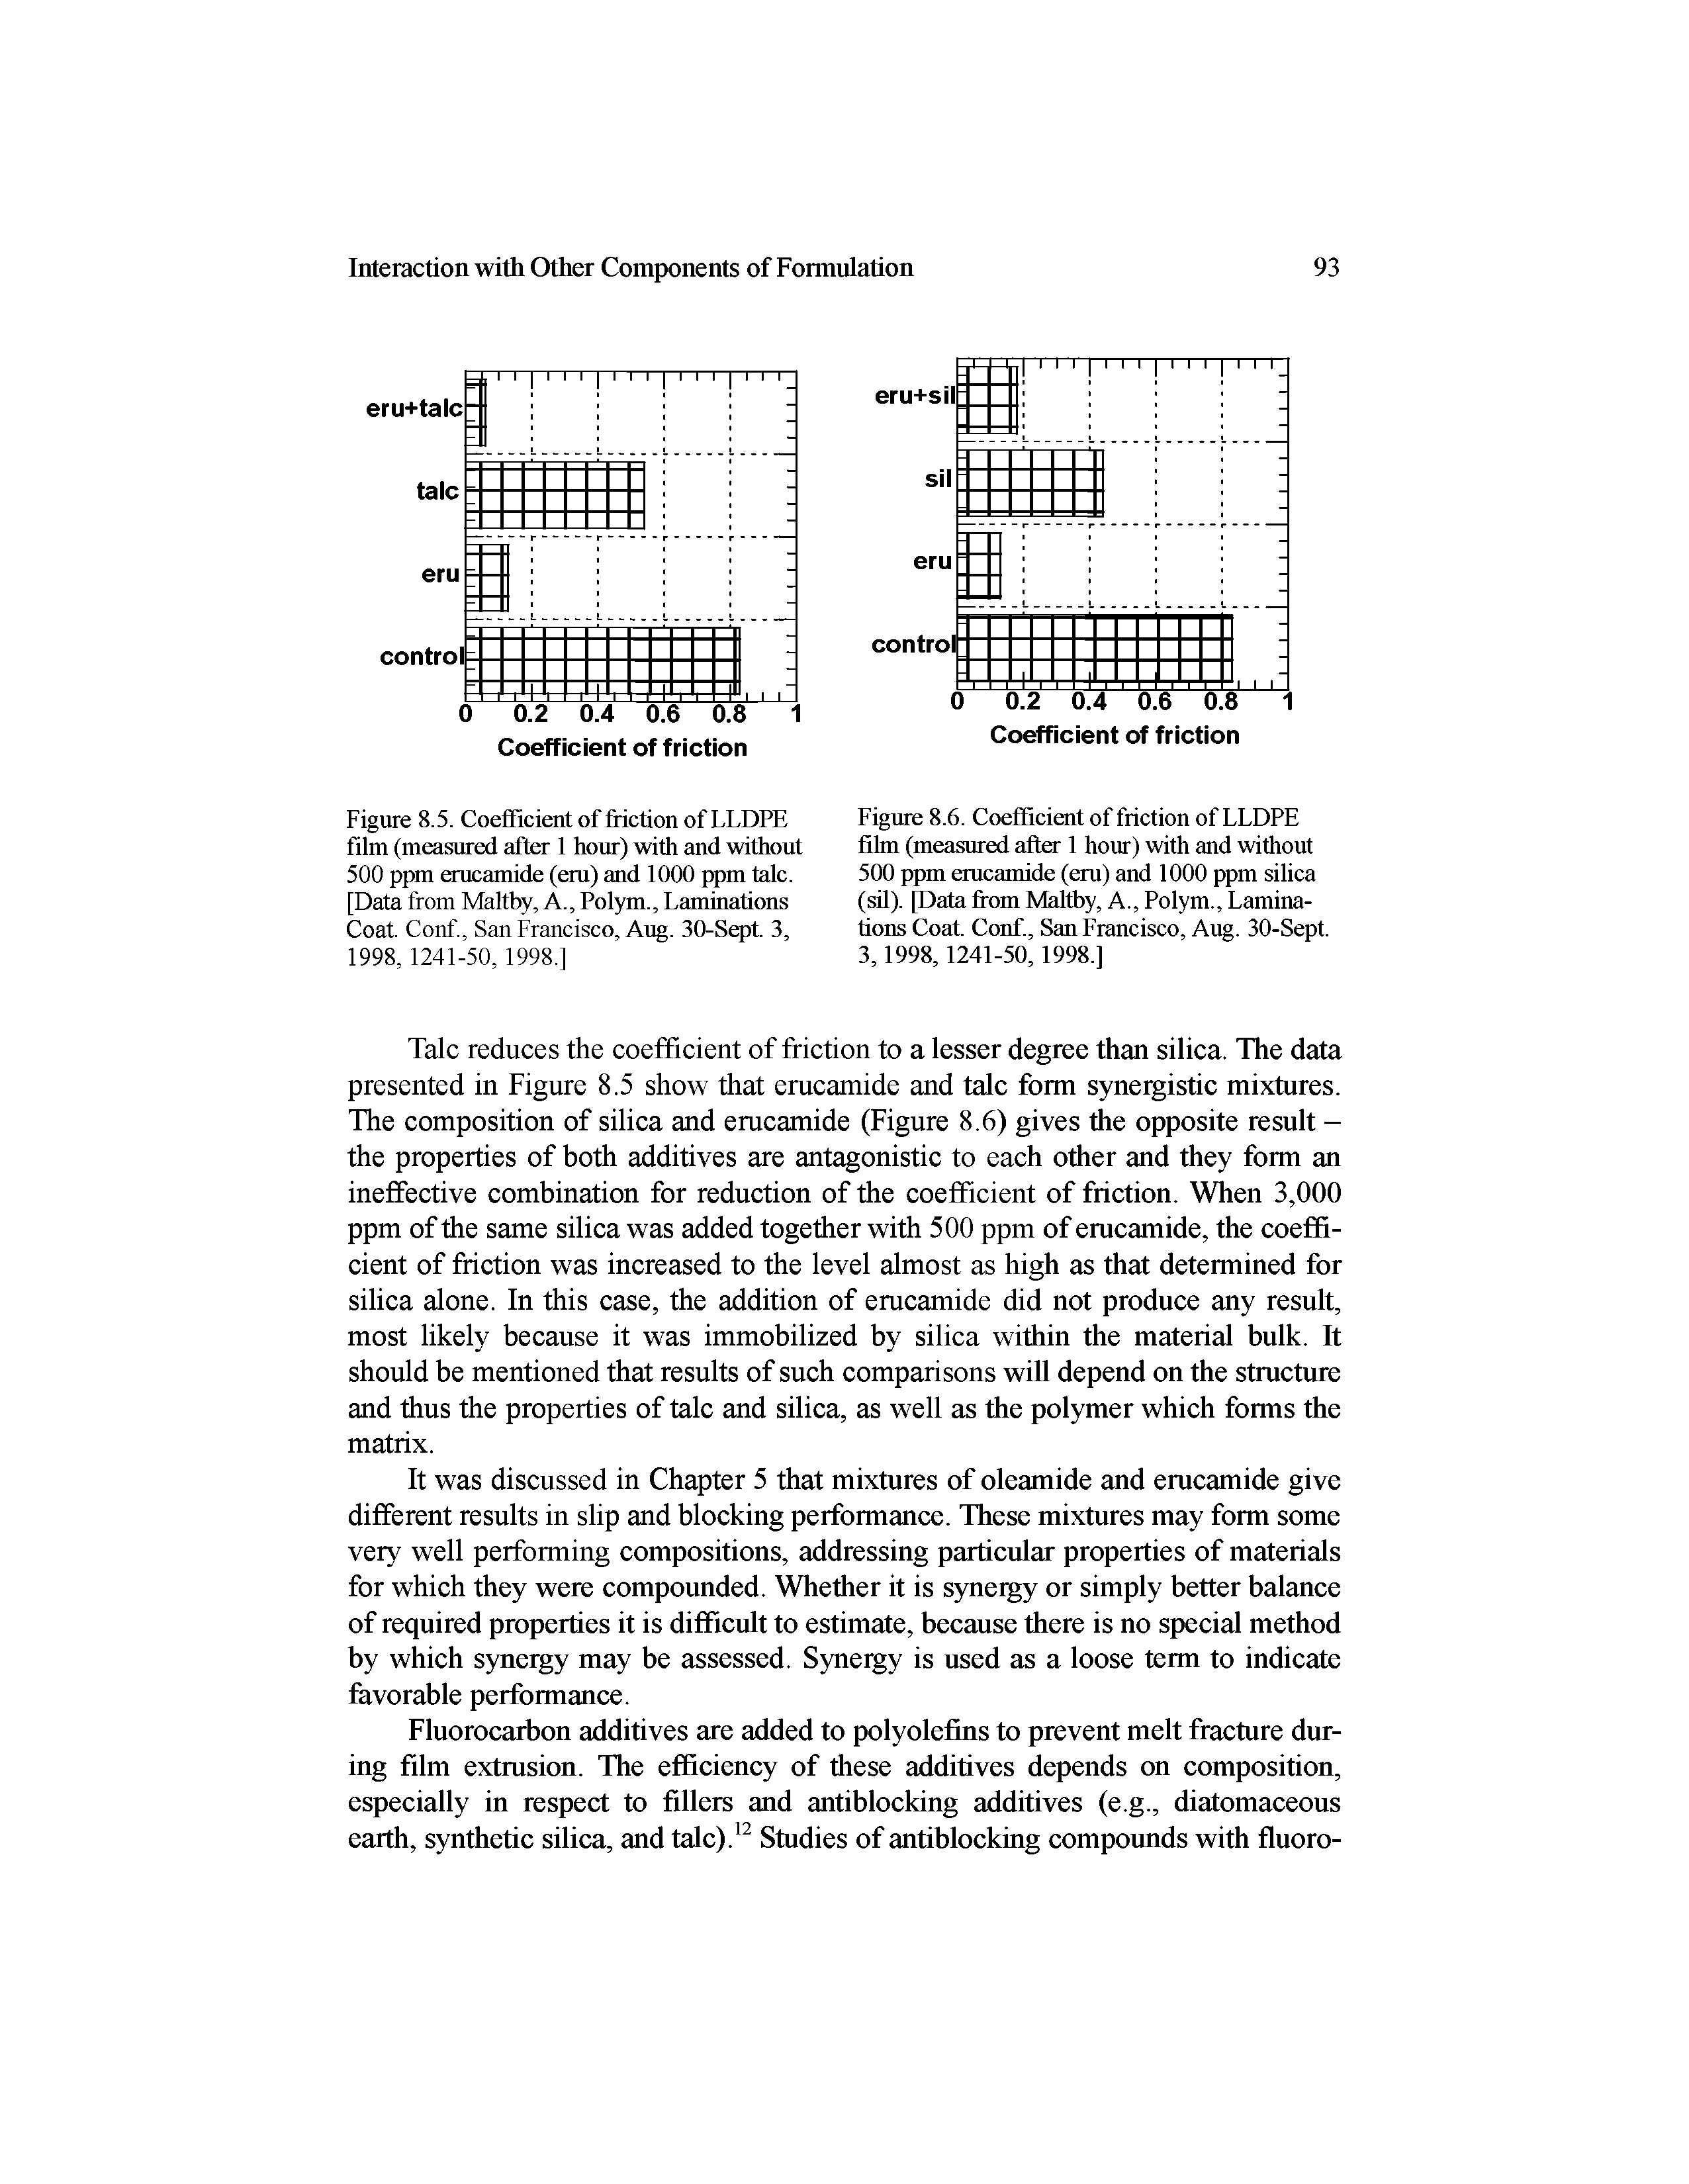 Figure 8.5. Coefficient of ffiction of LLDPE film (measured after 1 hour) with and without 500 ppm erucamide (em) and 10(X) ppm talc. [Data from Maltby, A., Polym., Laminations Coat Conf., San Francisco, Aug. 30-Sept 3, 1998,1241-50,1998.1...